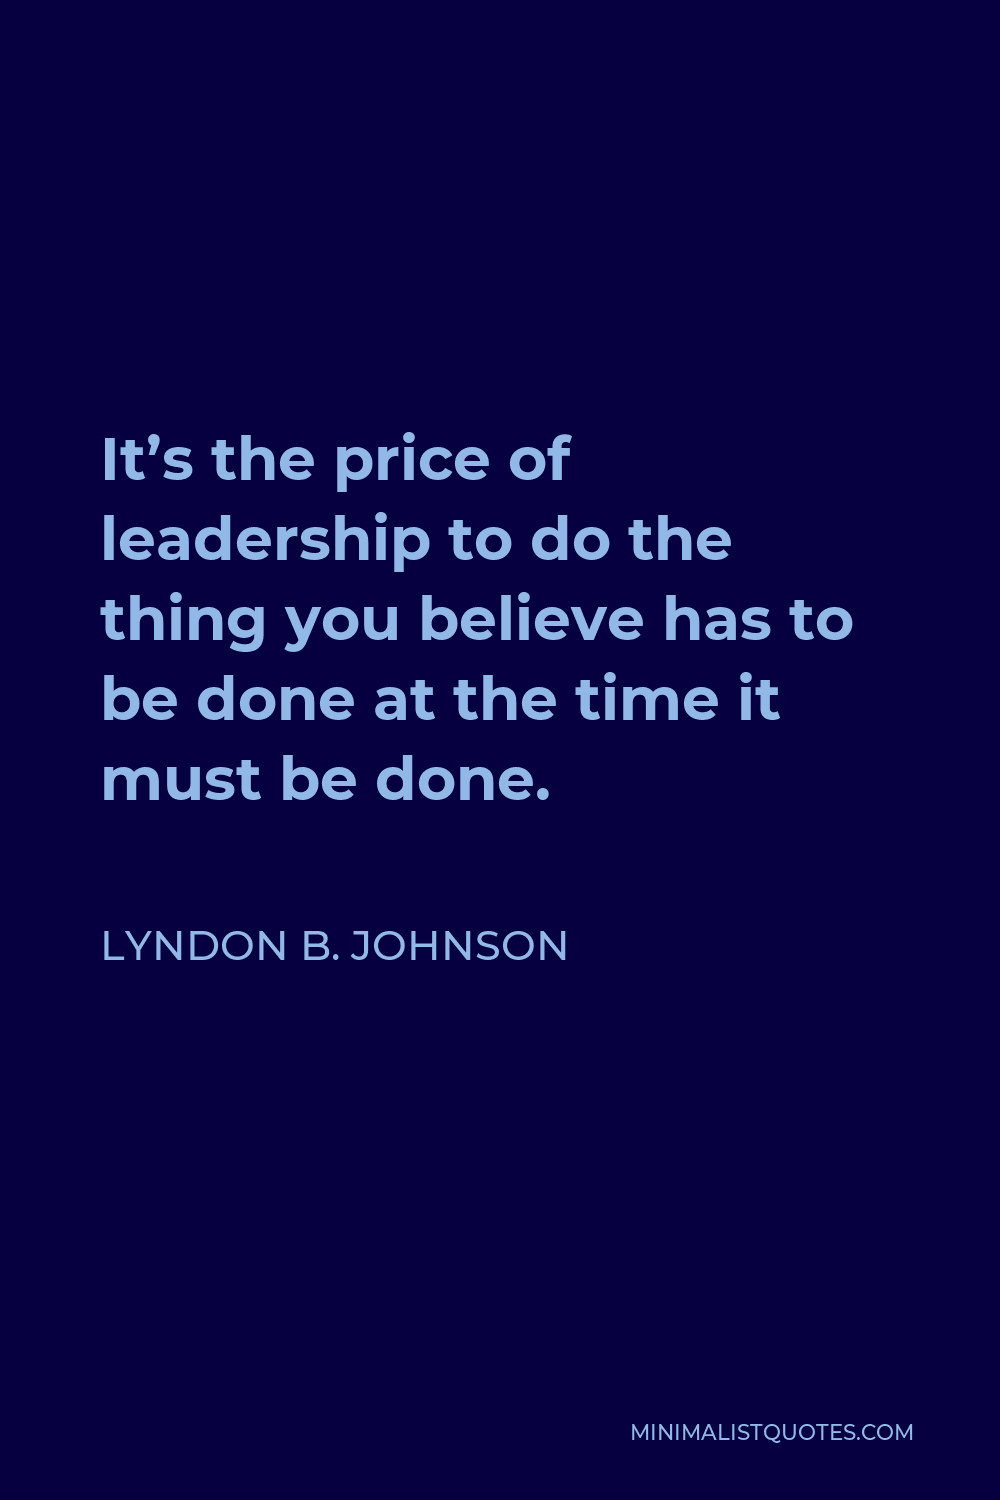 Lyndon B. Johnson Quote - It’s the price of leadership to do the thing you believe has to be done at the time it must be done.